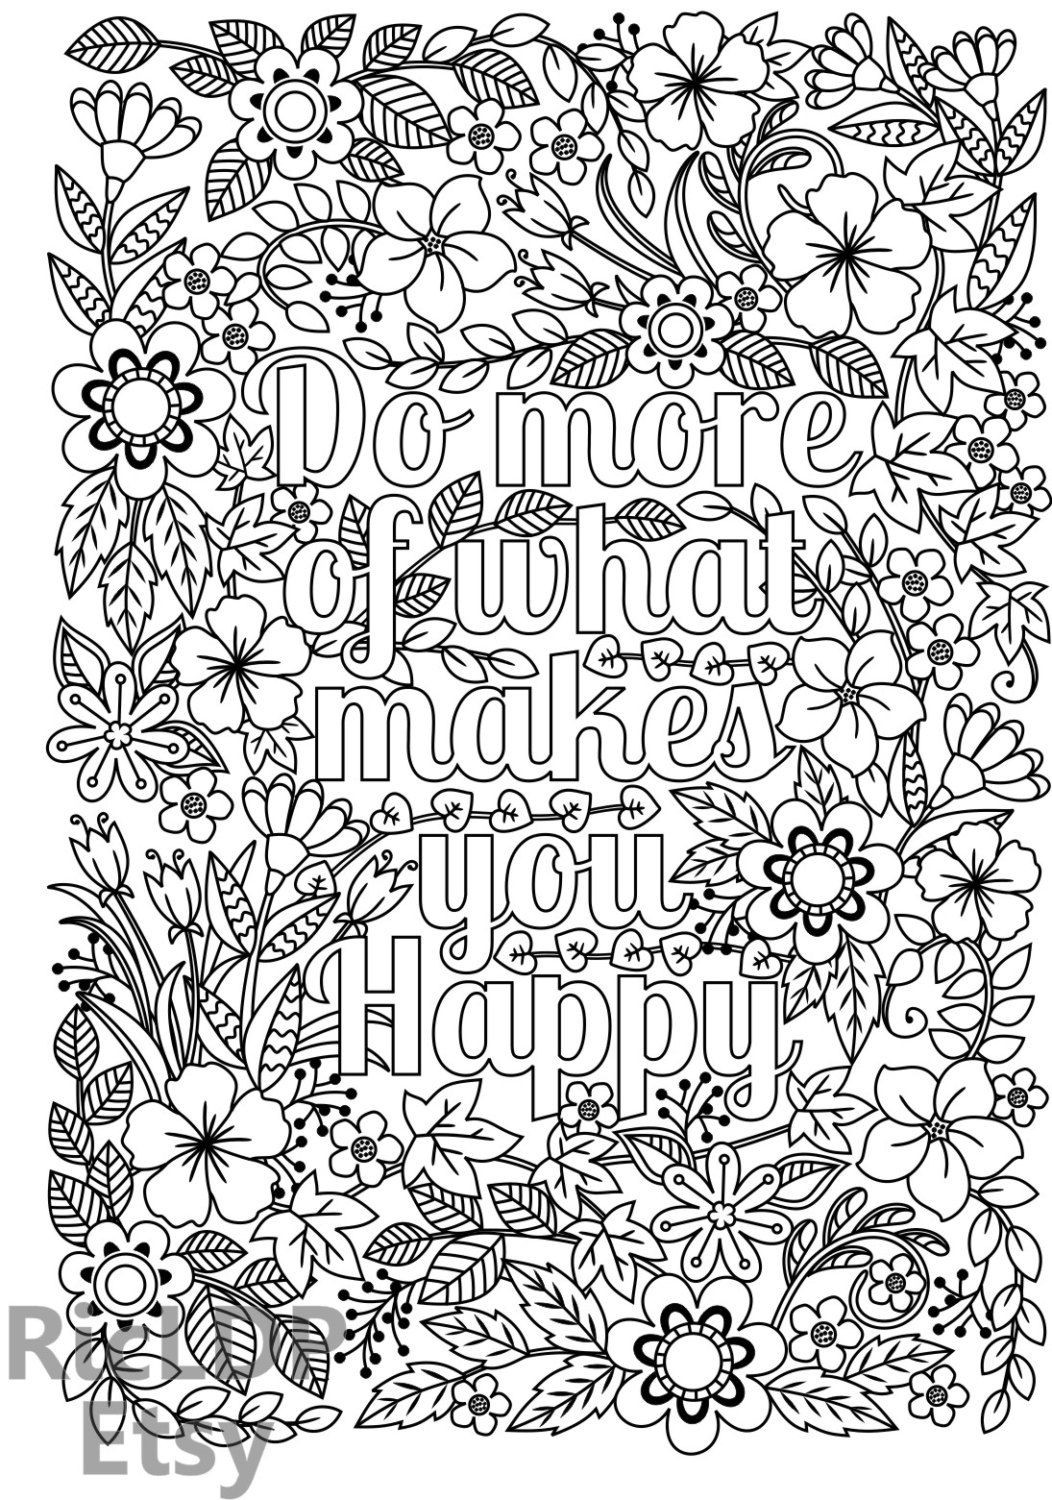 Free Adult Coloring Pages Printable
 Do More of What Makes You Happy Coloring Page for Kids